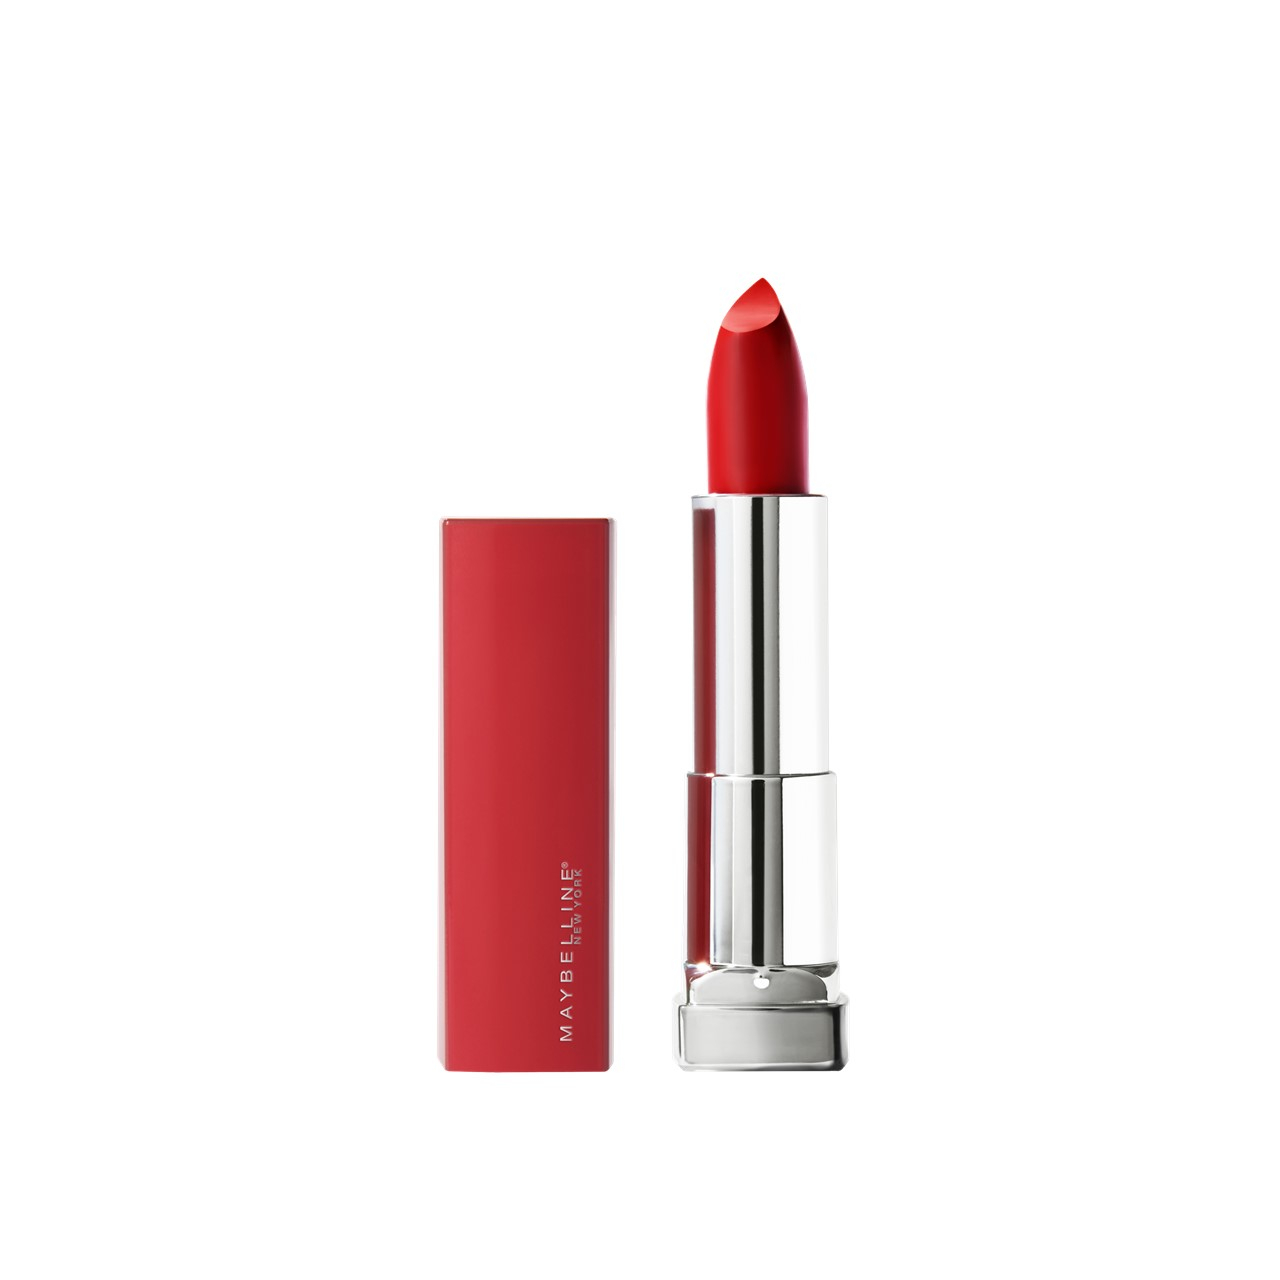 https://static.beautytocare.com/media/catalog/product/m/a/maybelline-color-sensational-made-for-all-lipstick-382-red-for-me.jpg